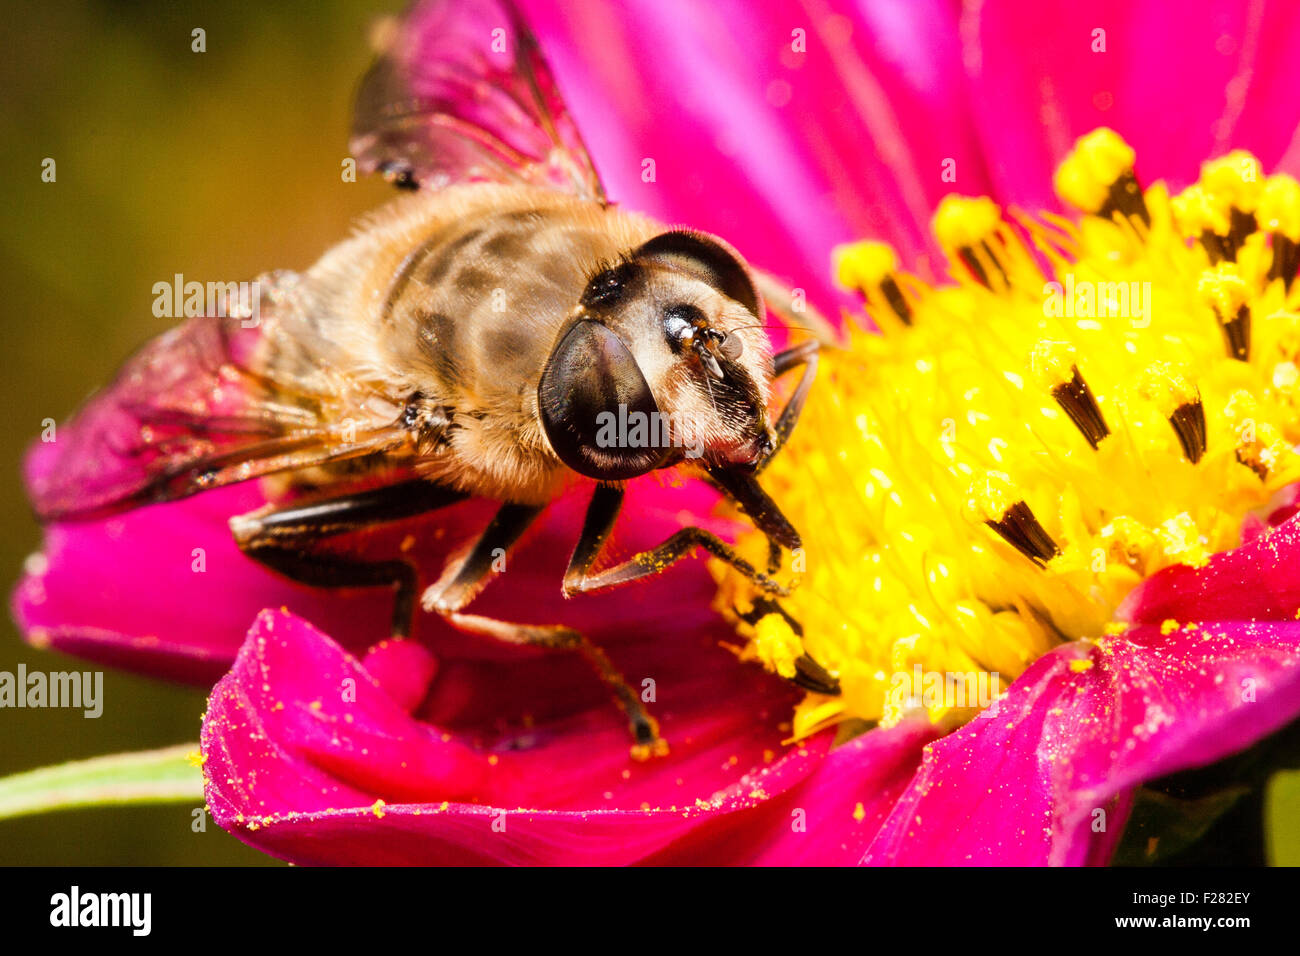 Insect. Close up macro of a facing Hover fly, 'myathropa Florae', collecting nectar with tongue from cosmos flower. AKA Flowerfly and sweat bee. Stock Photo